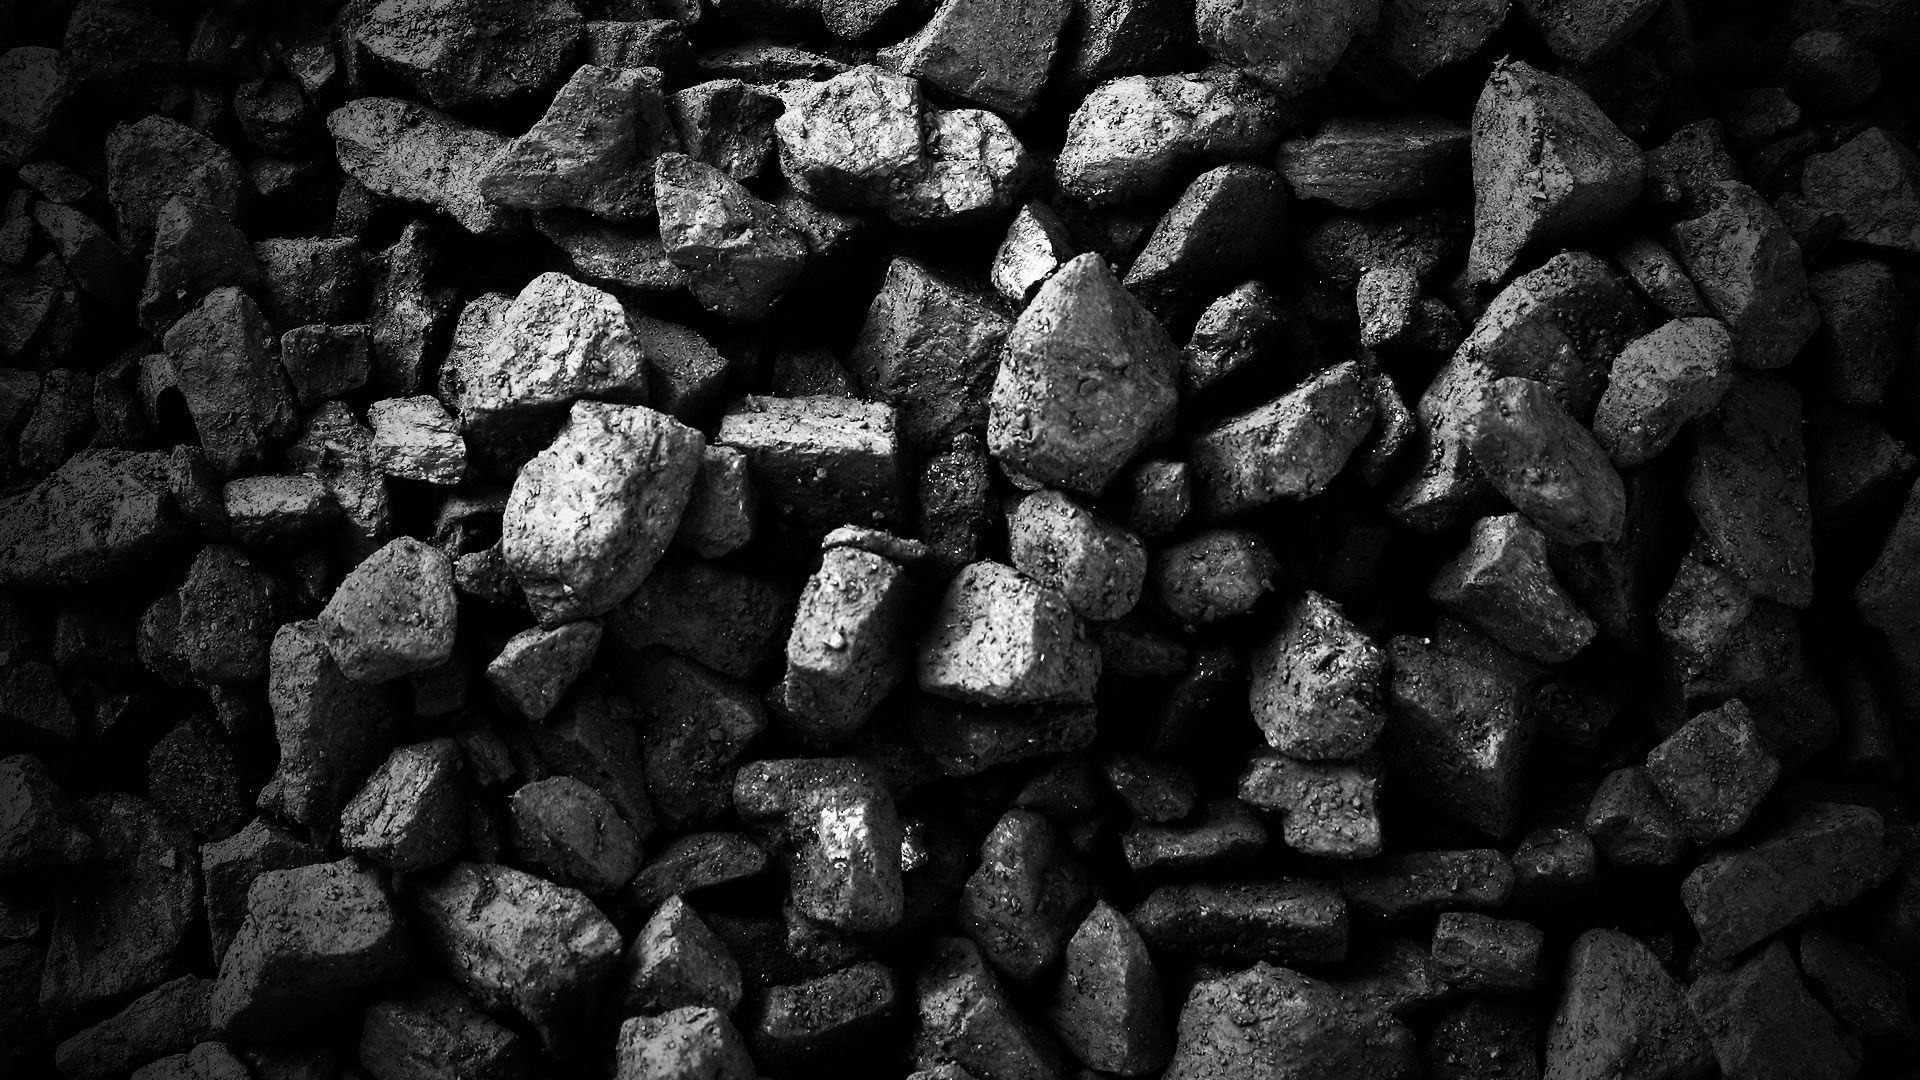 CEB yet to fully pay for coal shipments